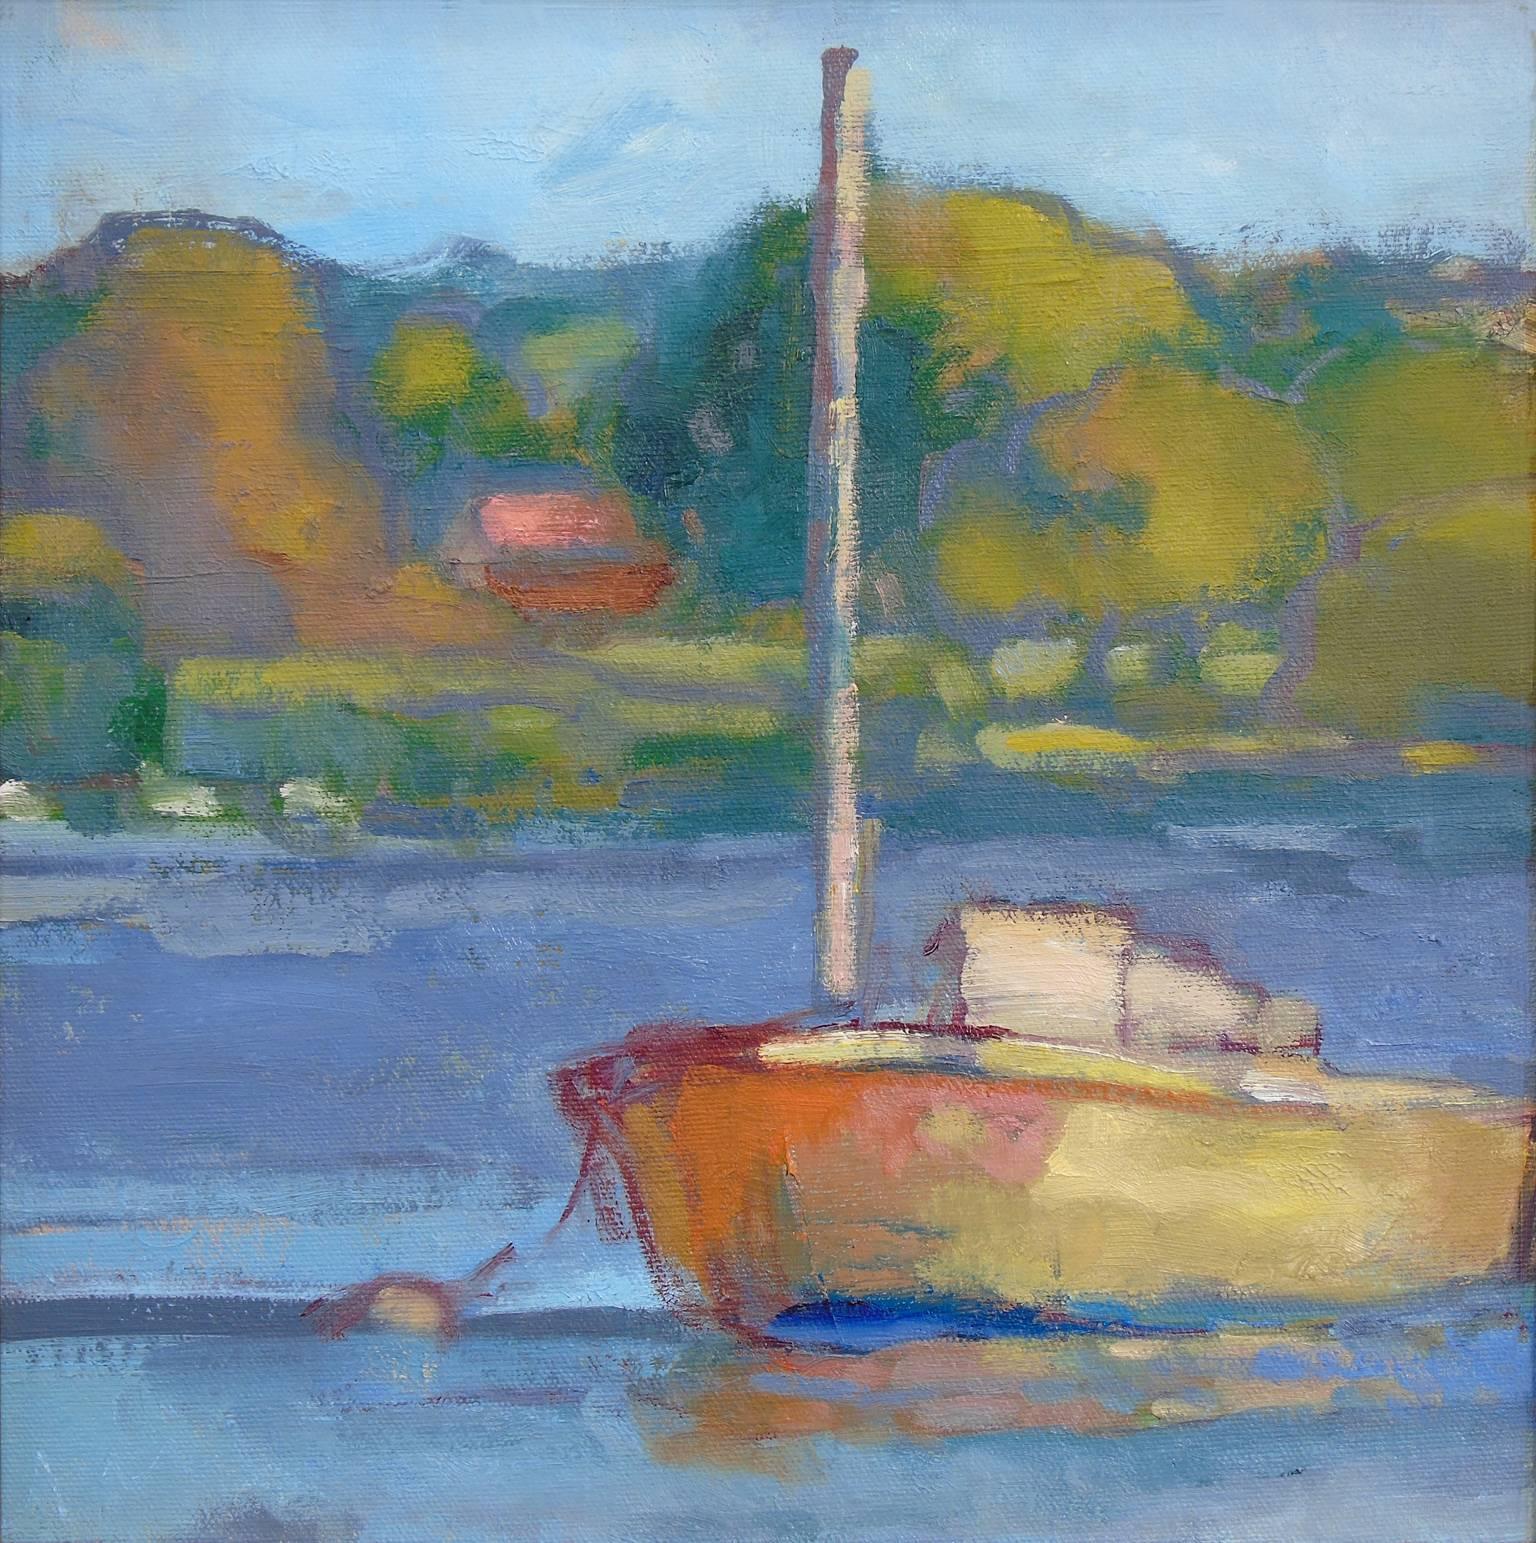 Boat at Rest - Painting by Robert Glisson